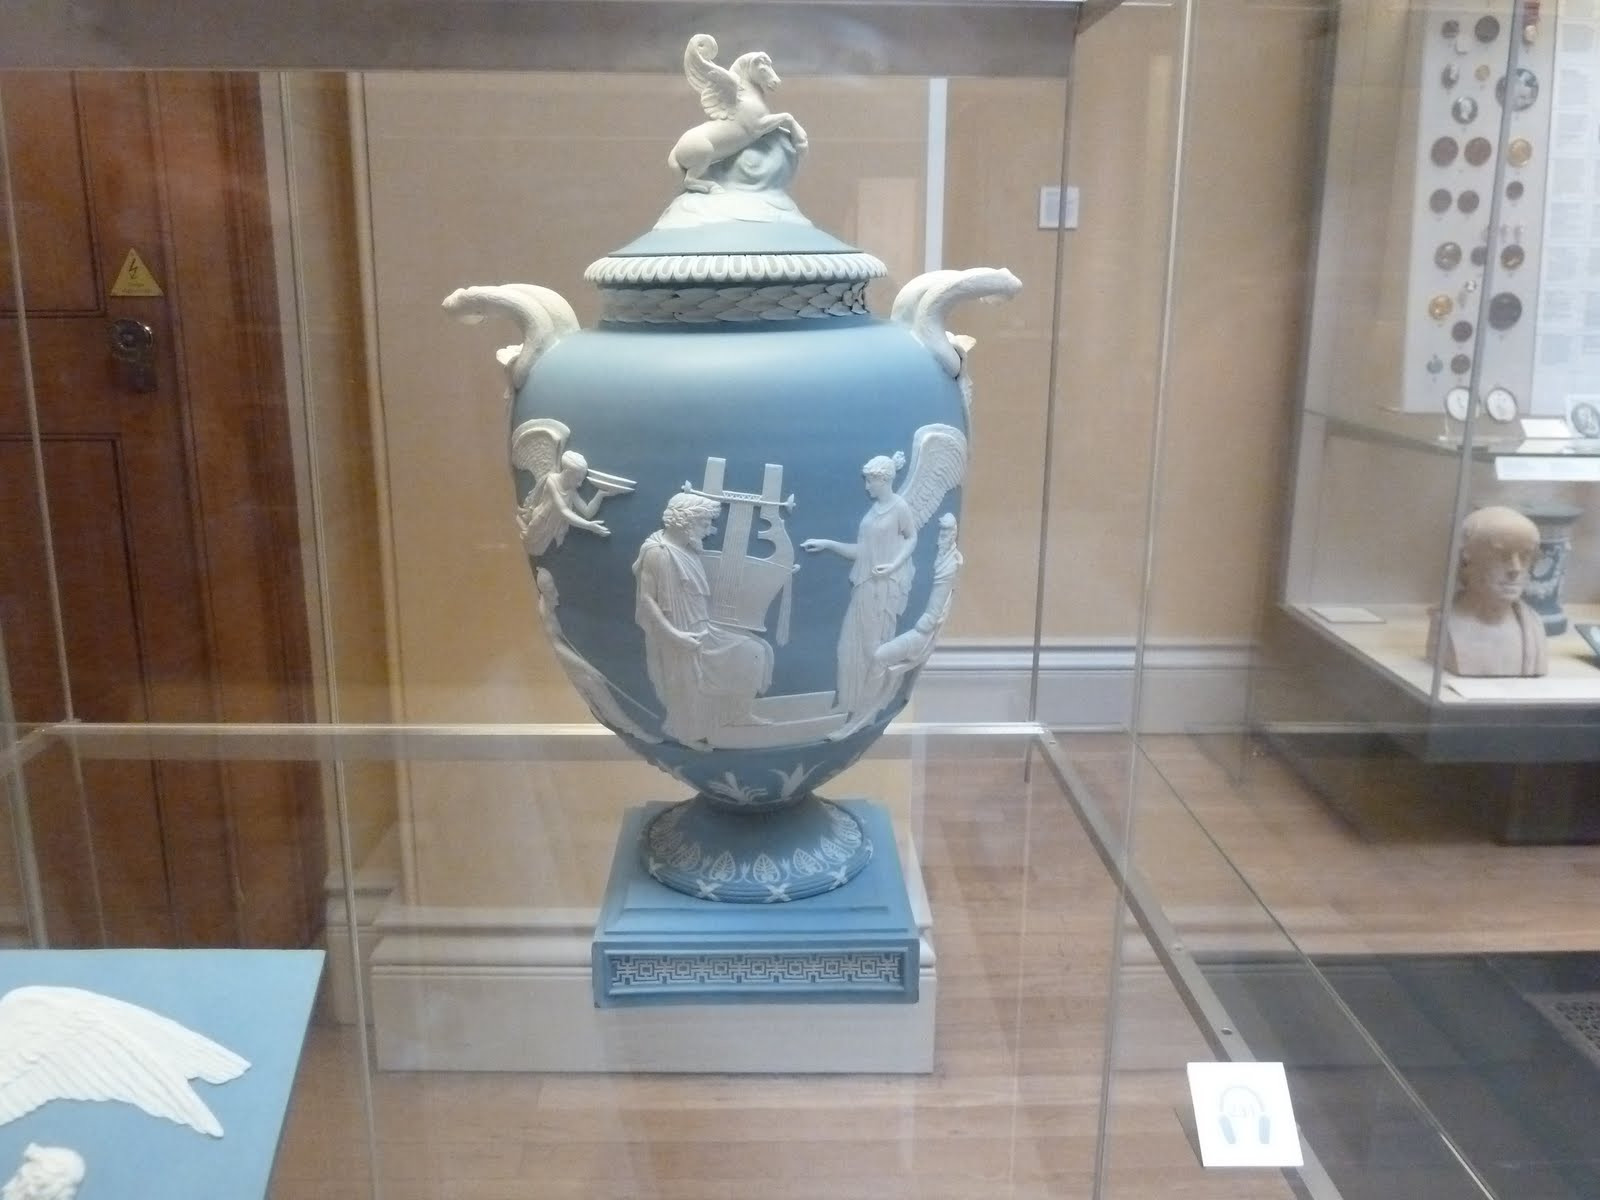 26 Best Wedgwood Portland Vase 2022 free download wedgwood portland vase of travels with victoria page 9 number one london with regard to the pegasus vase jasperware thrown with applied reliefs england staffordshire josiah wedgwood 1786 the